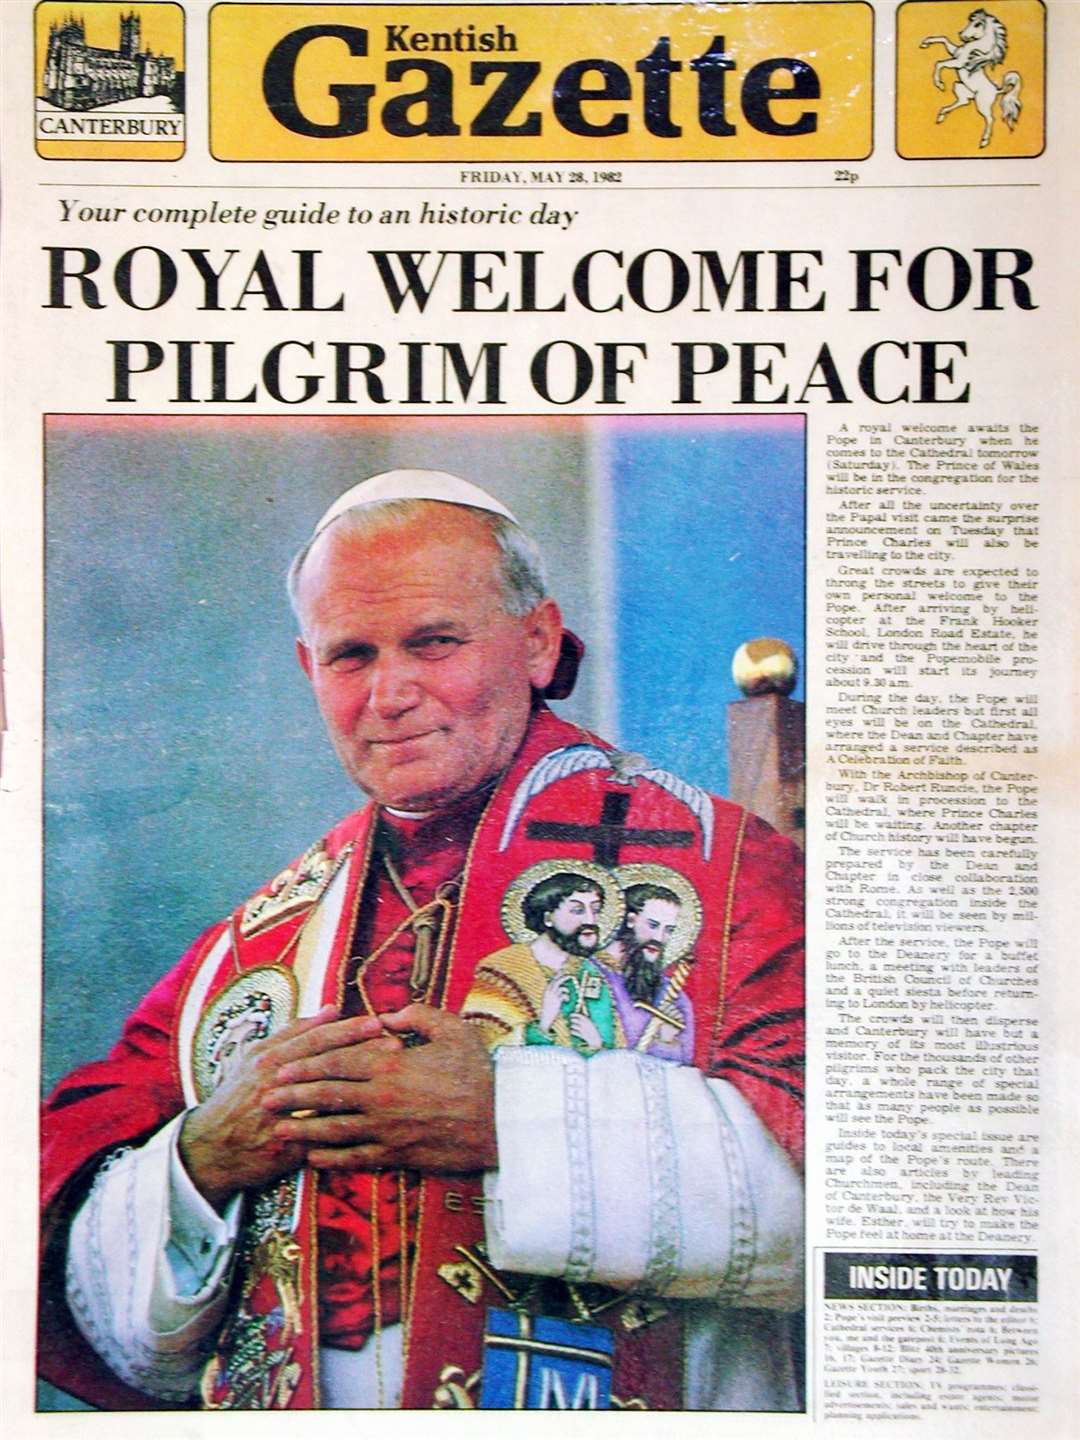 How the Kentish Gazette covered the Papal visit to Canterbury